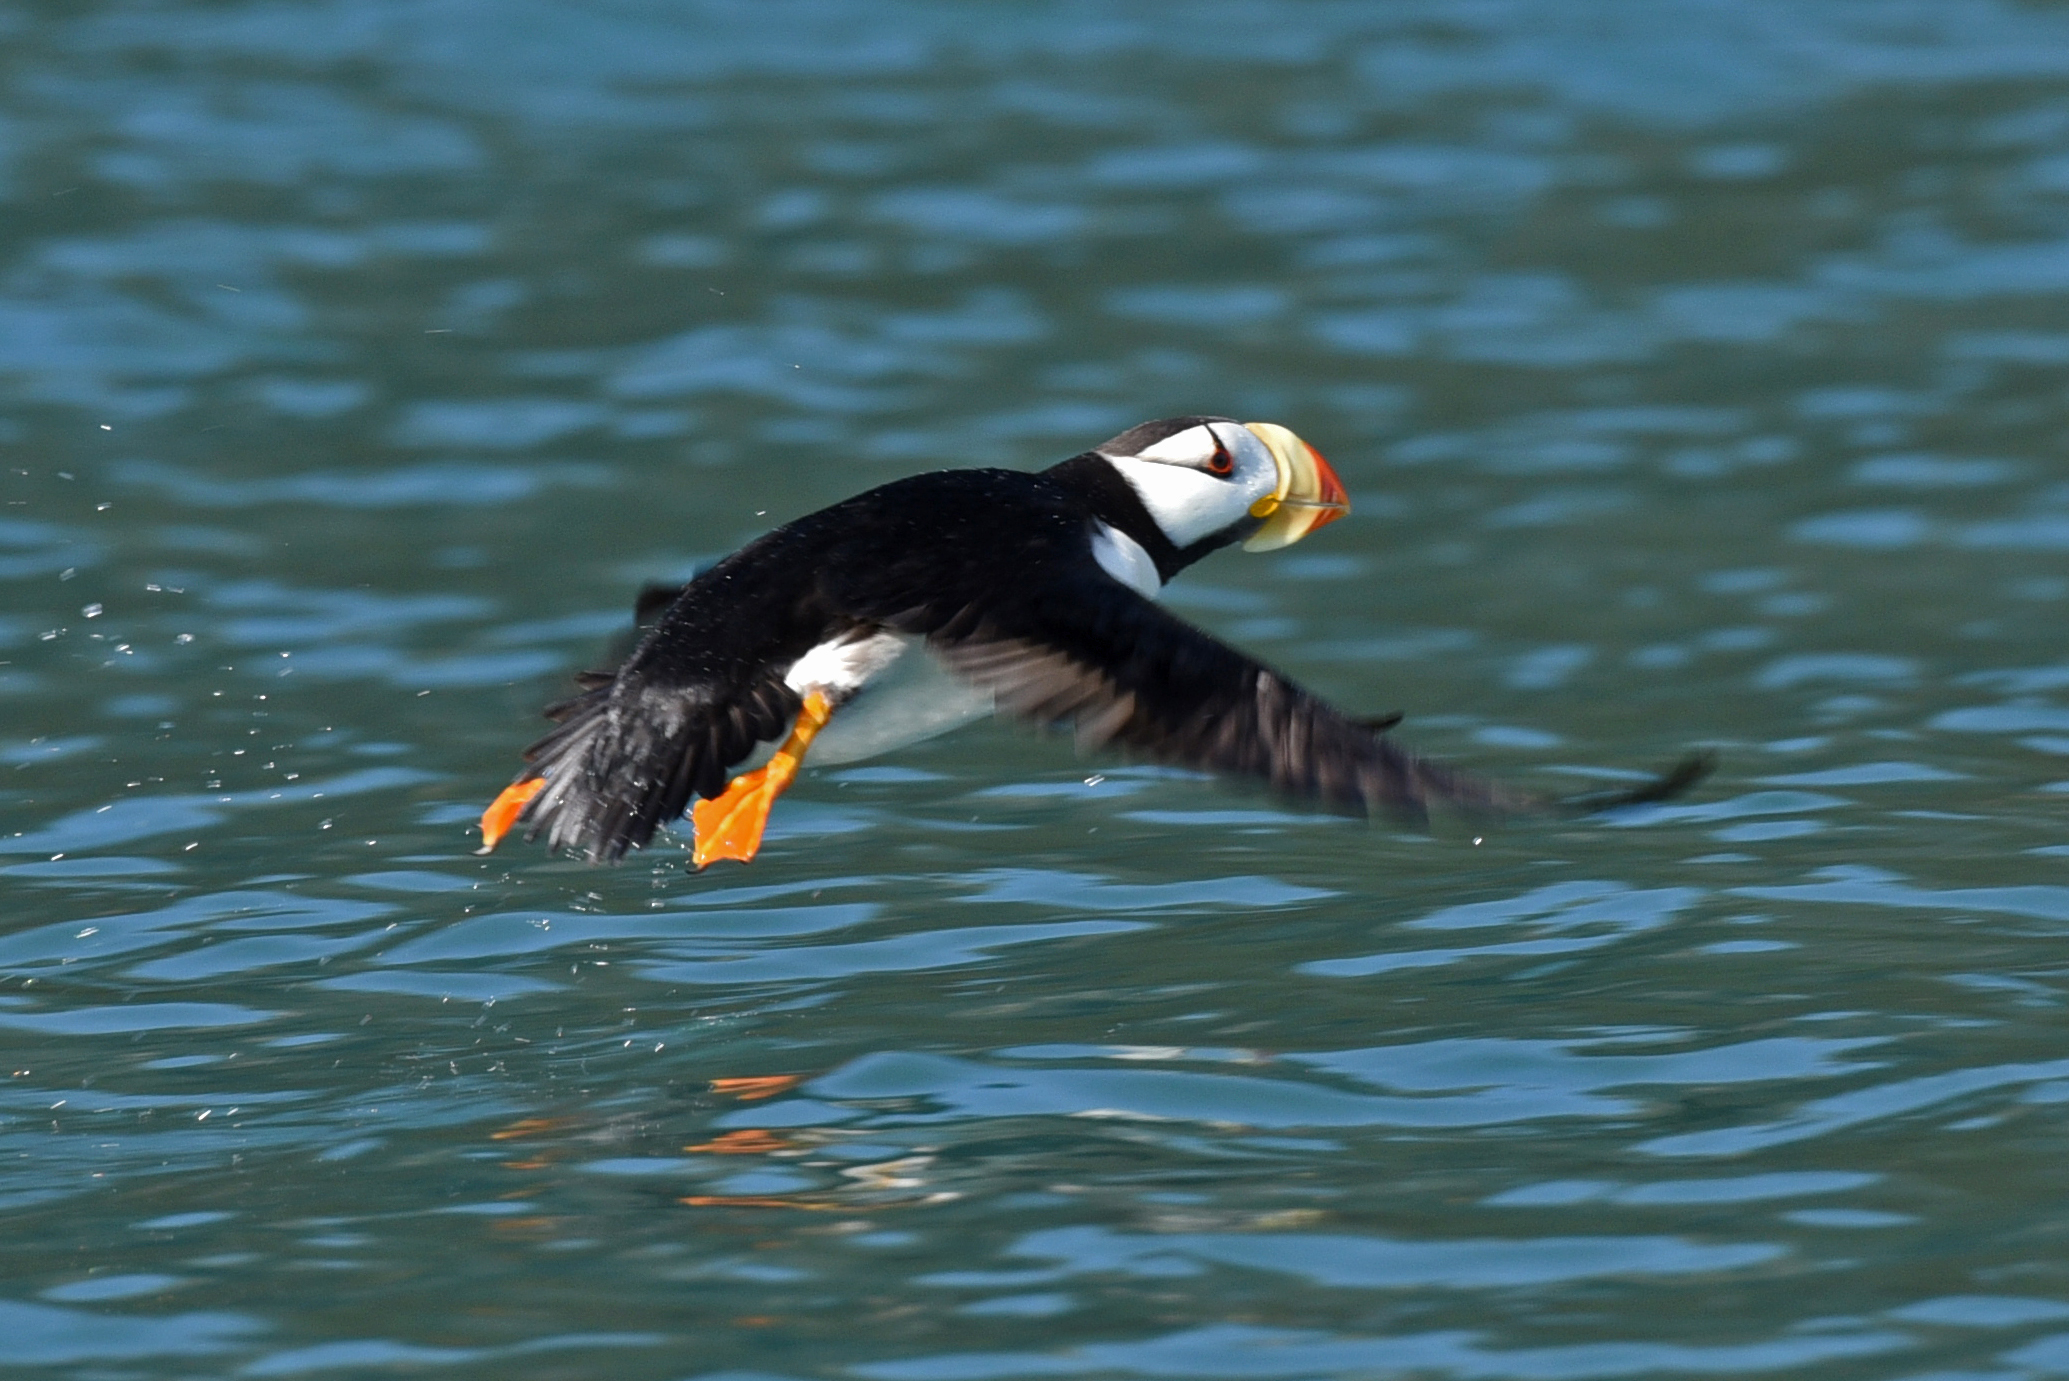 A horned puffin takes off in flight from the ocean.